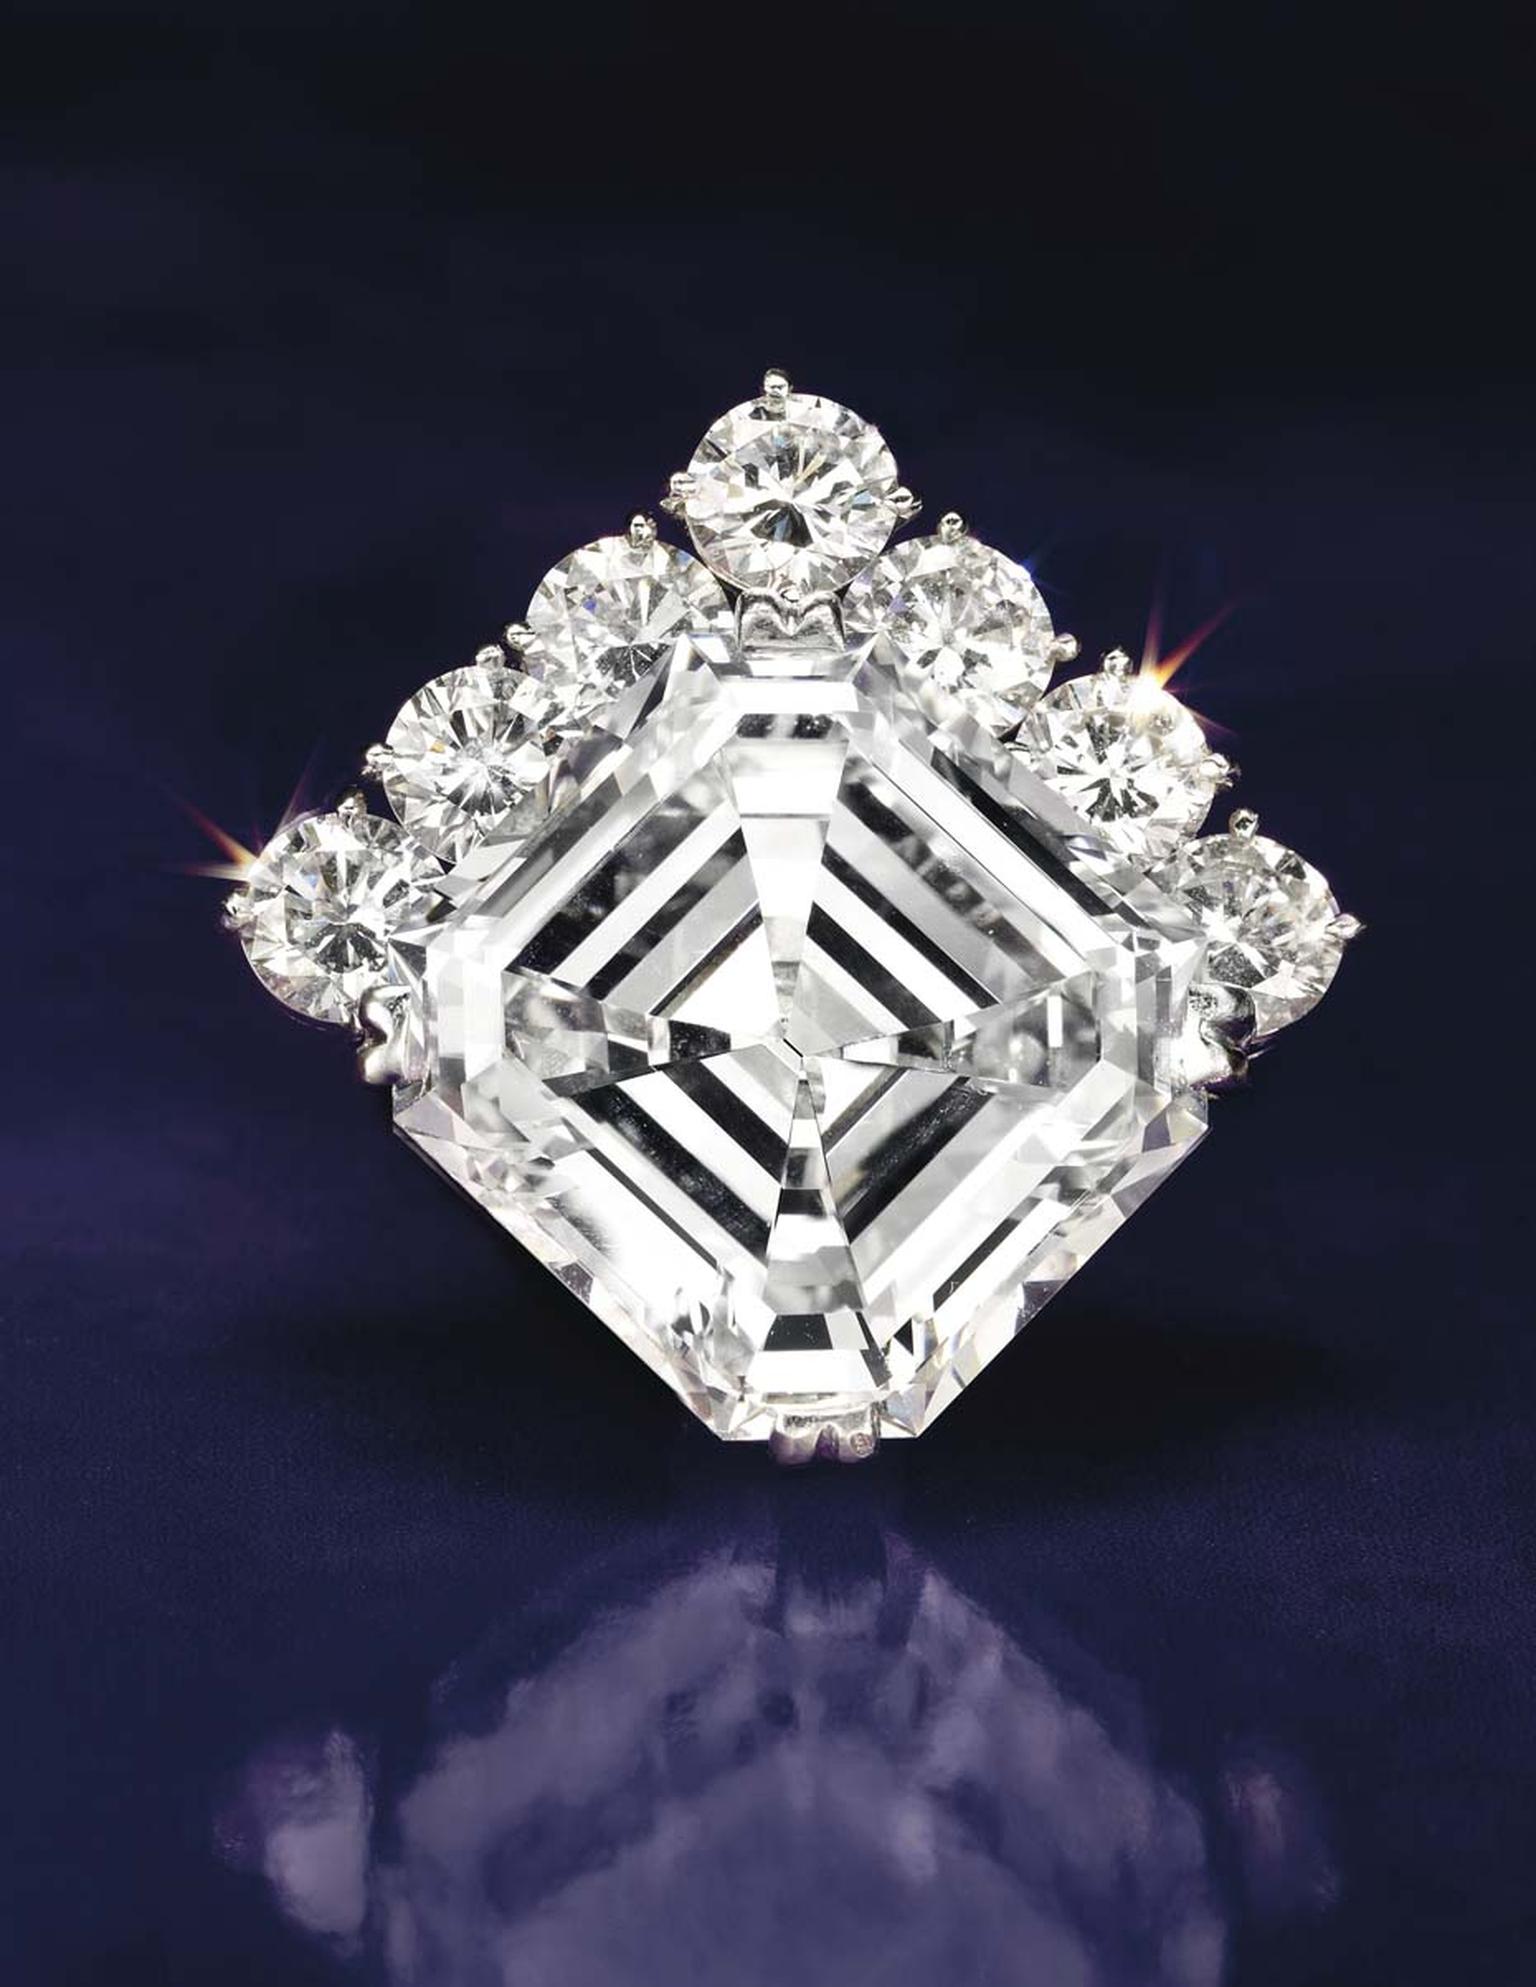 With a pre-sale estimate of US$700,000-900,000, this 18.38ct square-cut H color diamond pendant sold for US$941,000 during Christie’s New York sale of Important Jewels.